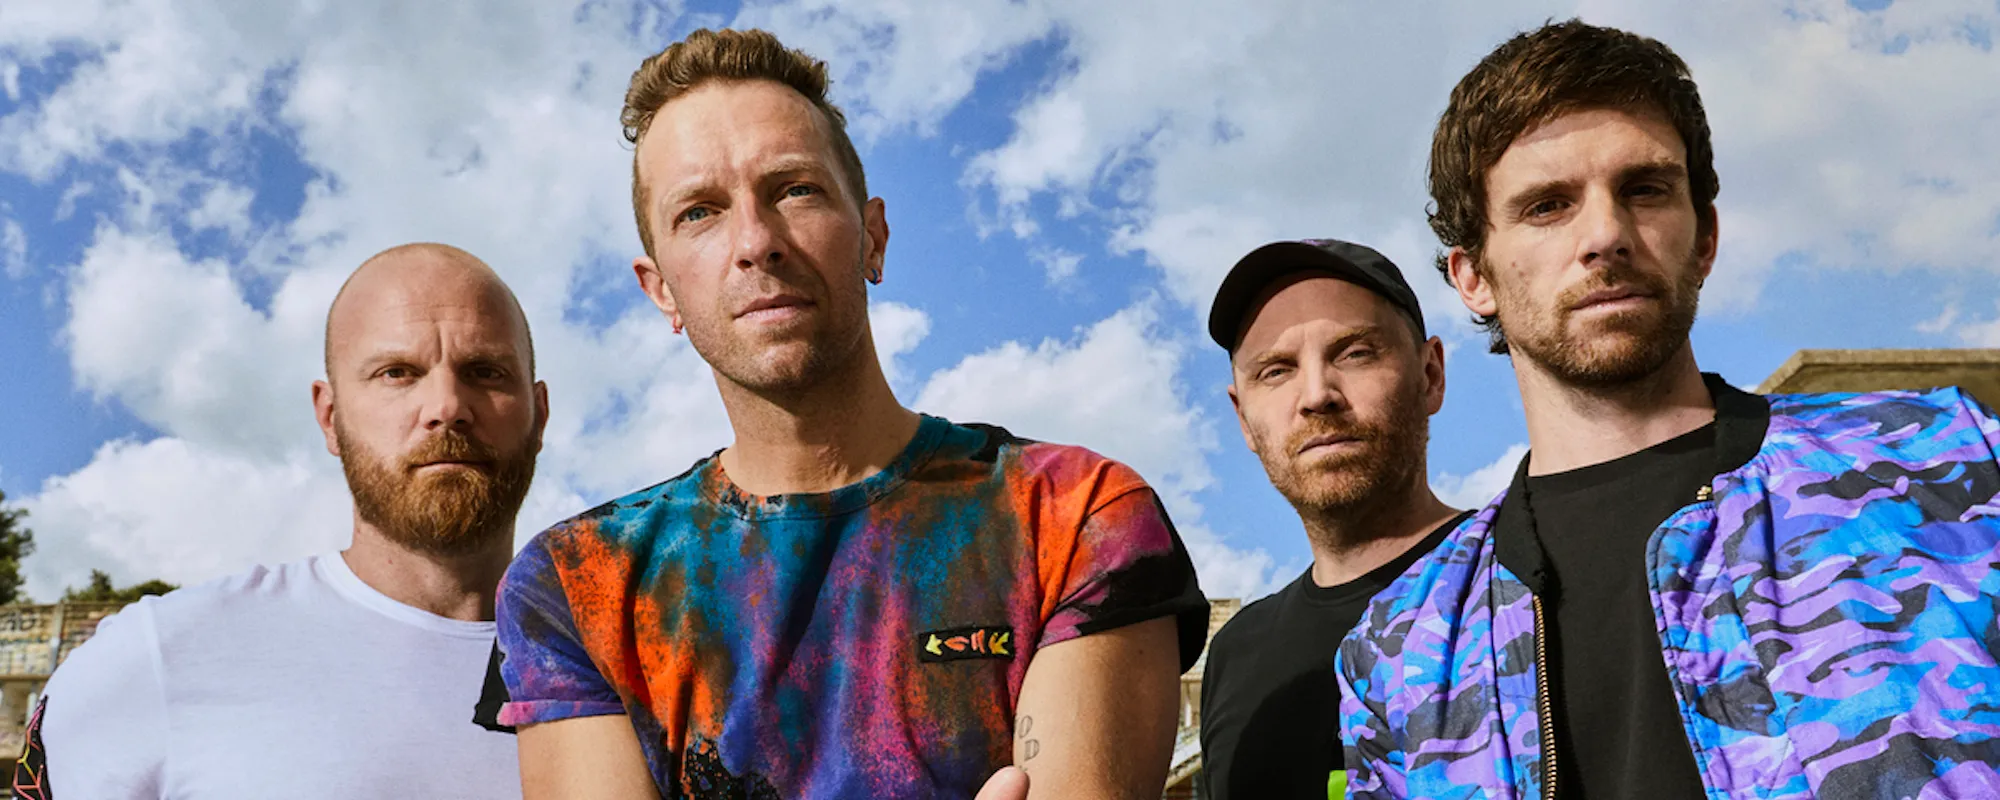 The Community-Focused Meaning Behind the Band Name: Coldplay